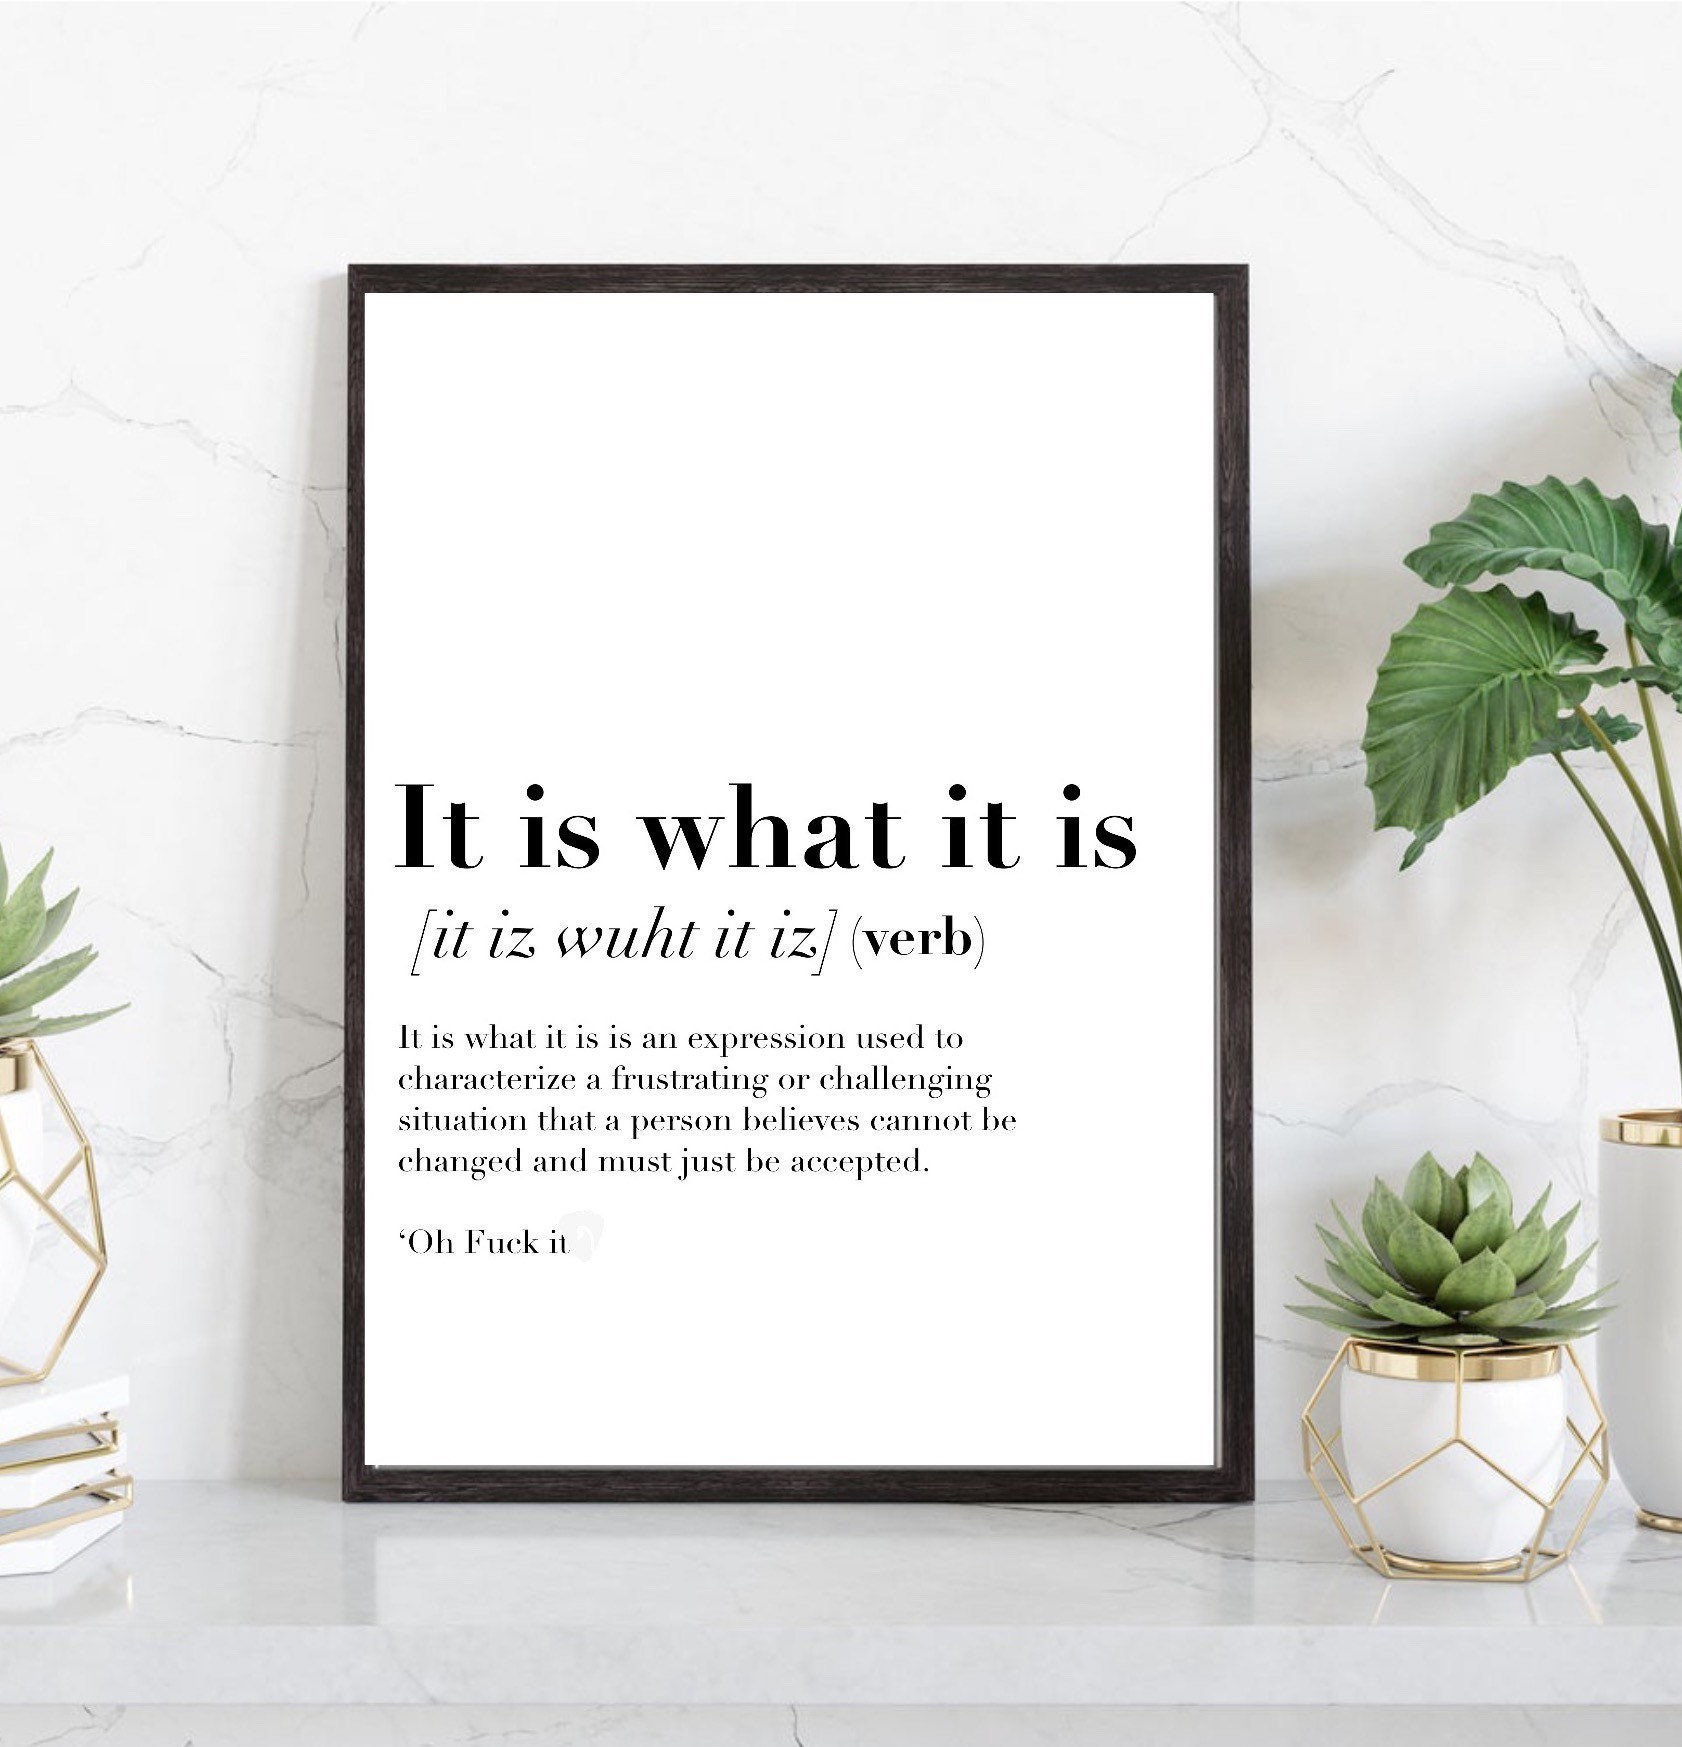 It is What It is Definition Print Wall Art Decor